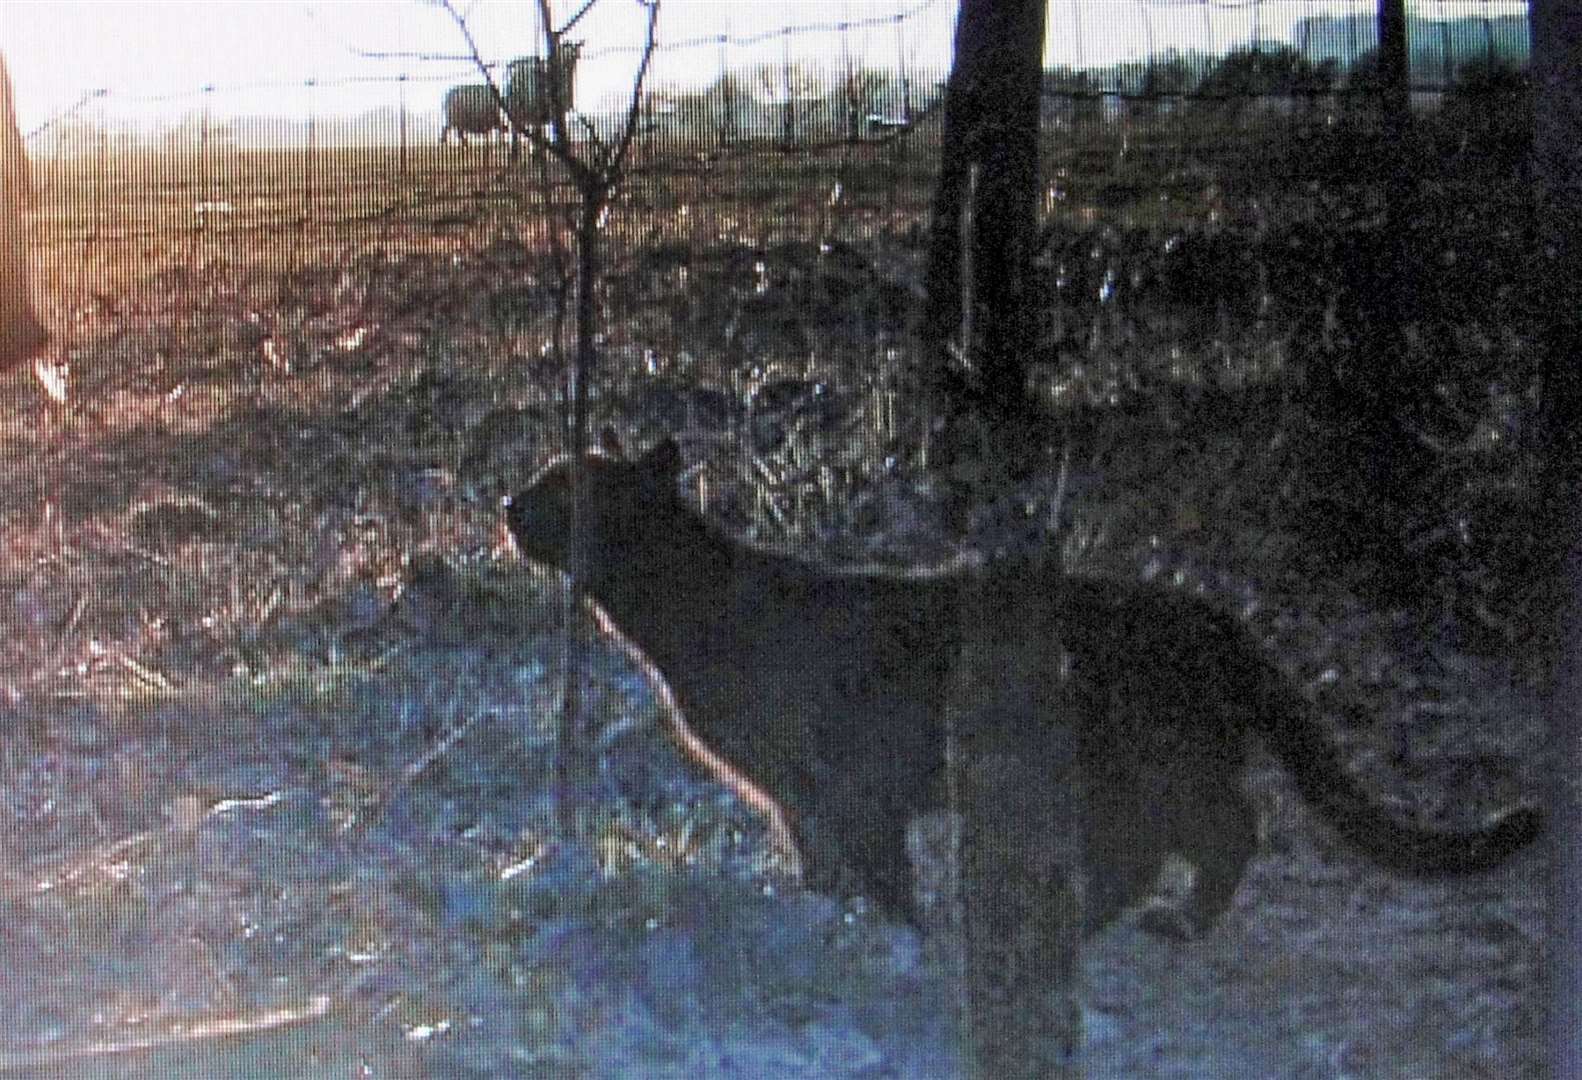 The 'big cat' caught on trail camera in Kent in 2013. Picture: SWNS